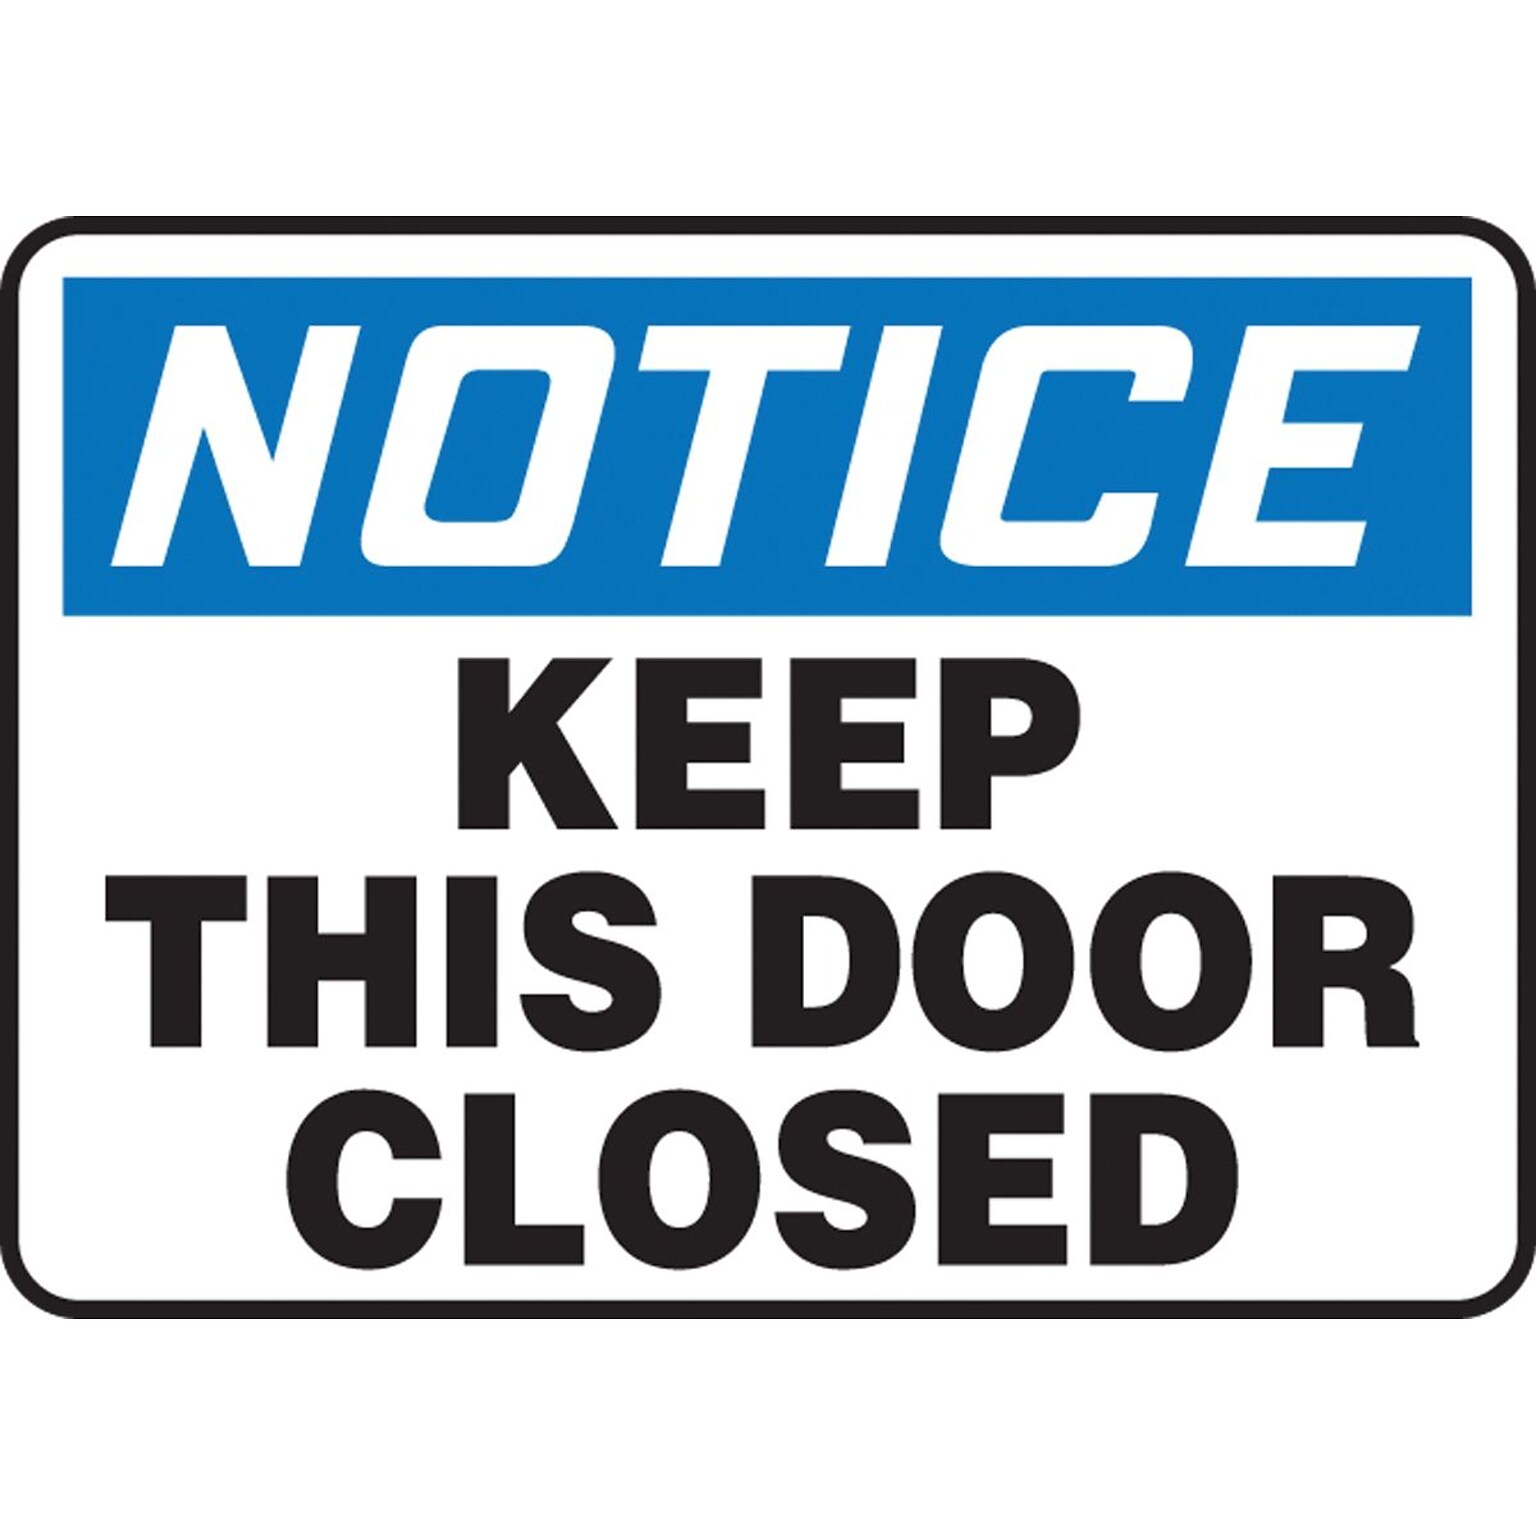 Accuform 7 x 10 Plastic Safety Sign NOTICE KEEP THIS DOOR CLOSED, Blue/Black On White (MABR823VP)